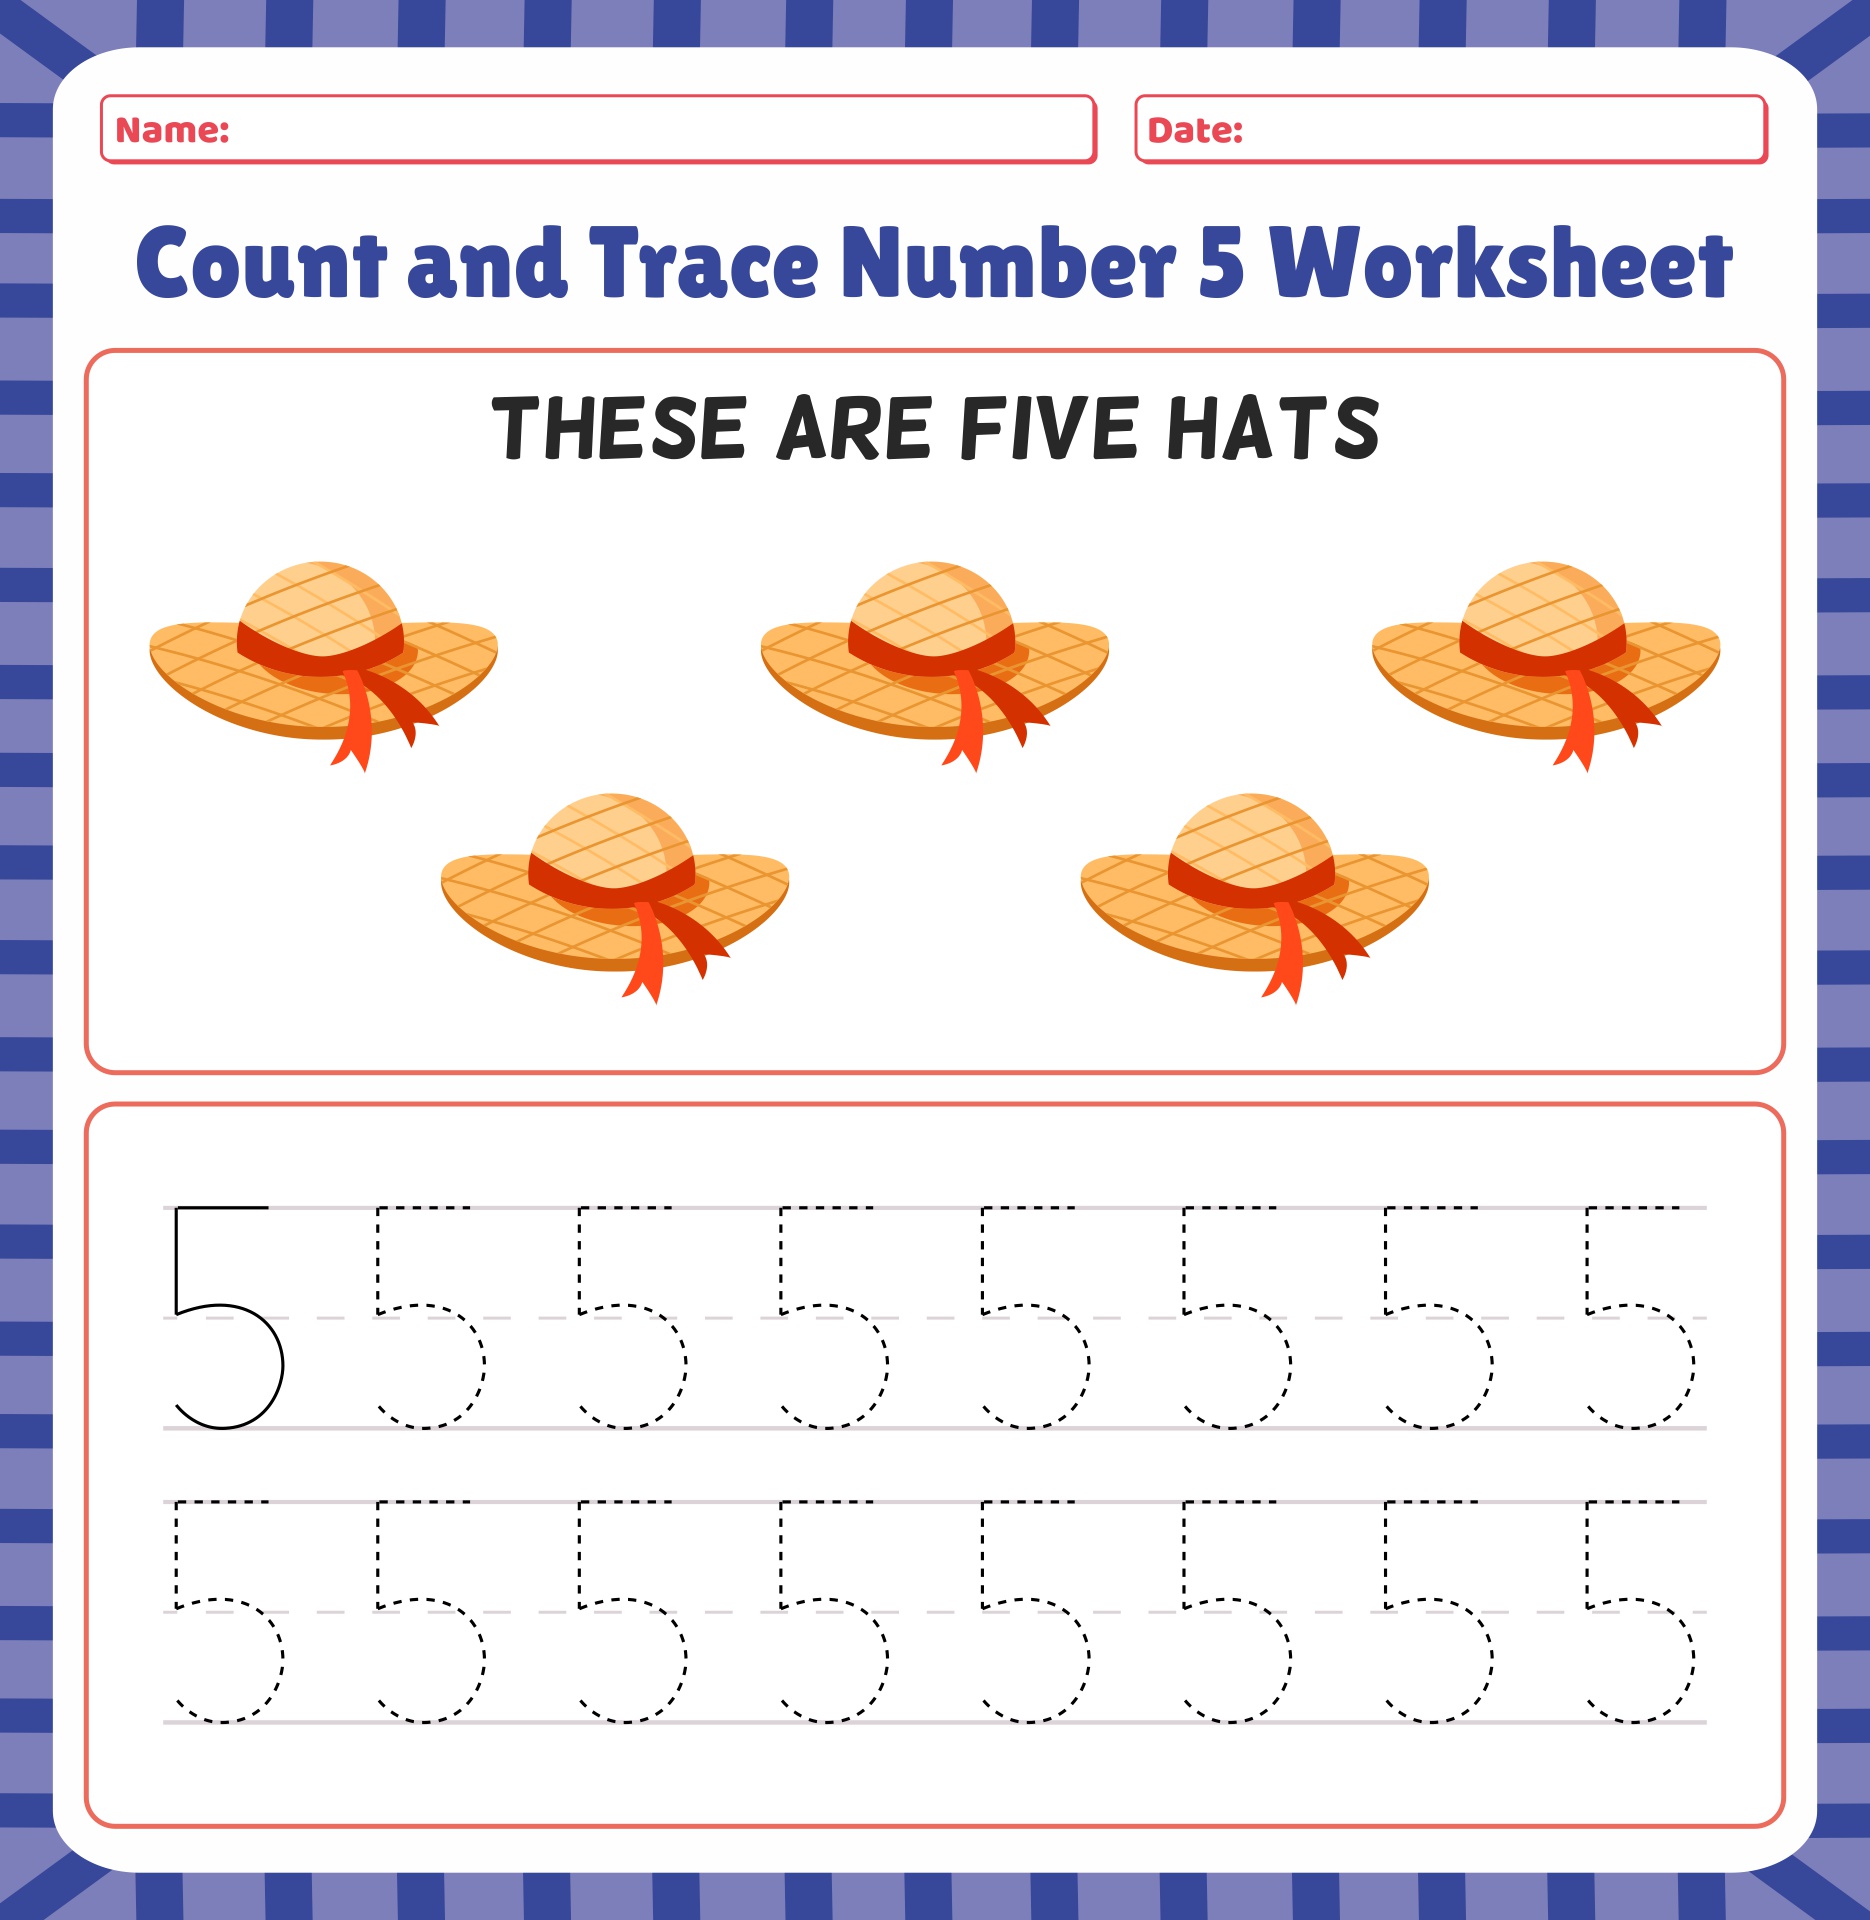 Count And Trace Number 5 Worksheet Printable